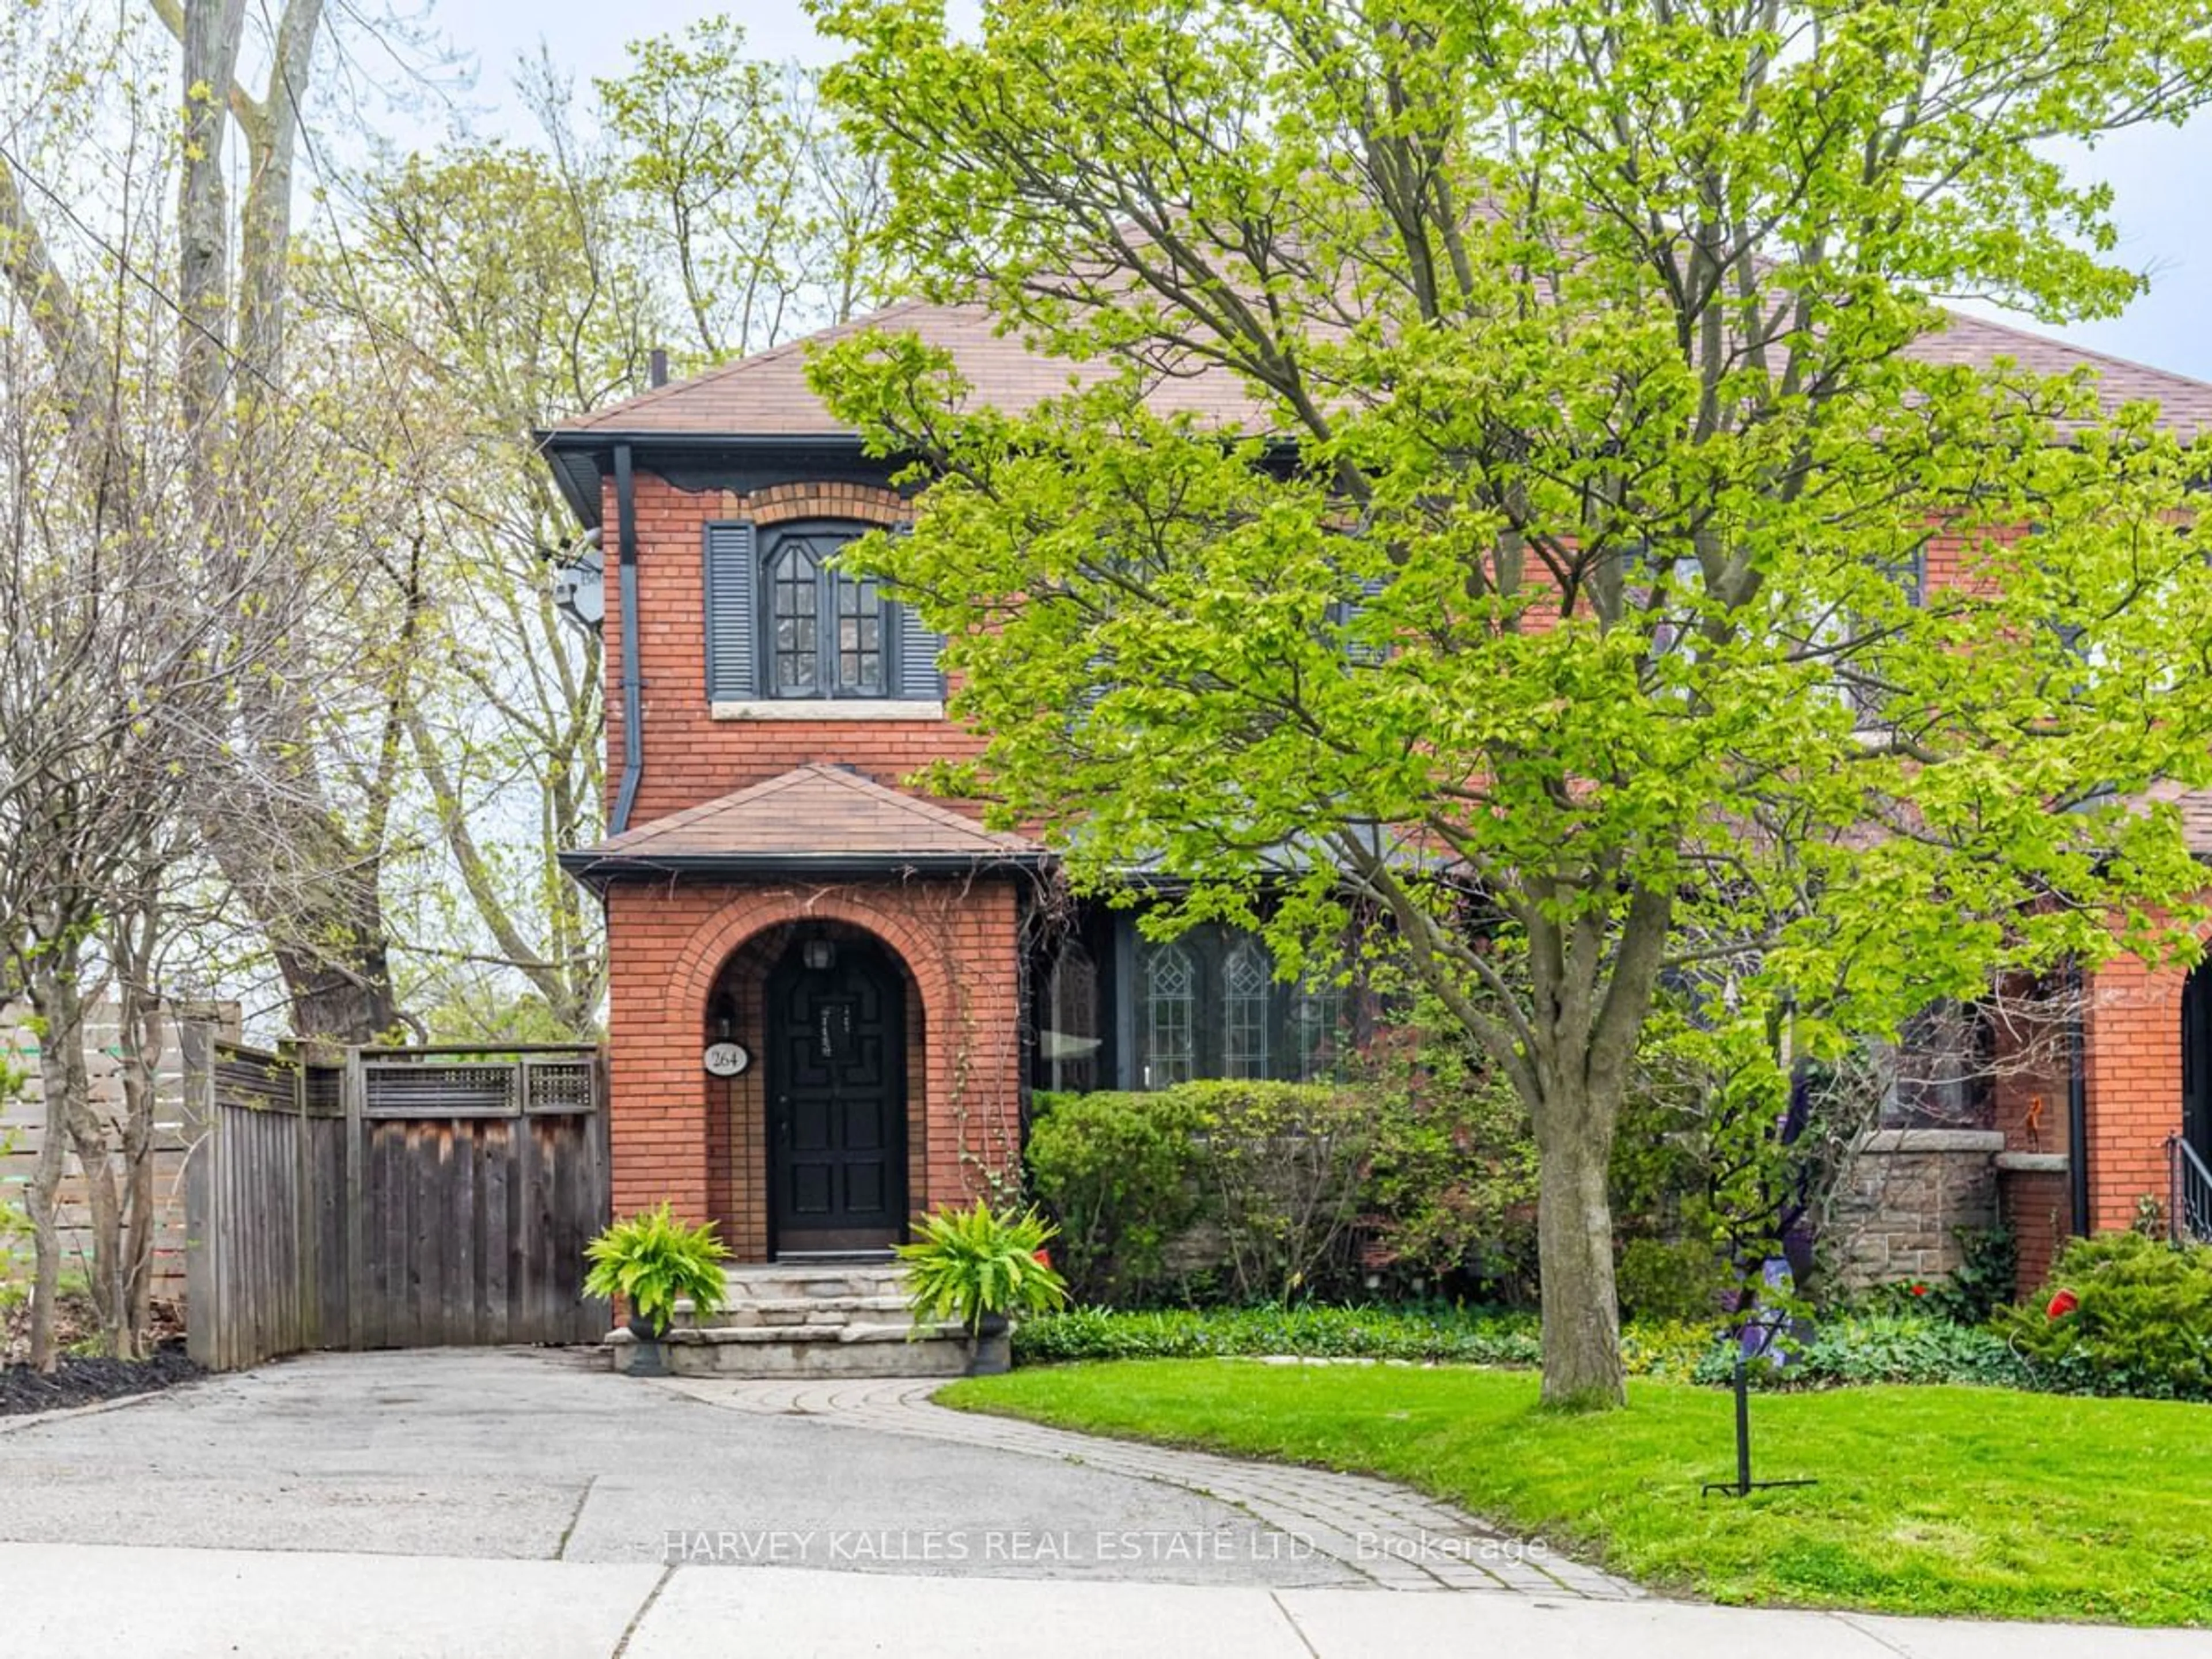 Home with brick exterior material for 264 Castlefield Ave, Toronto Ontario M4R 1G7